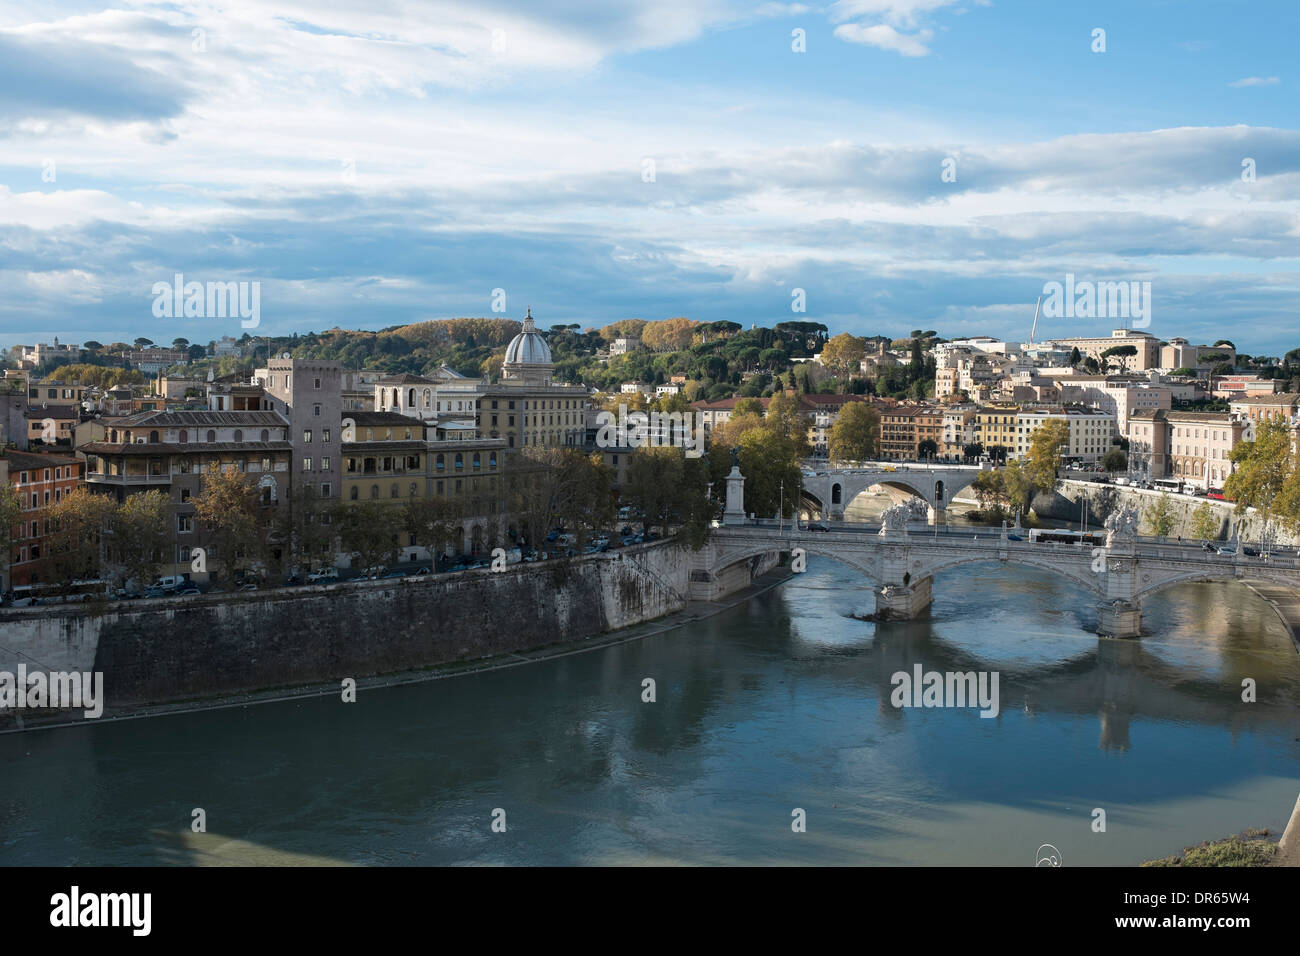 View from Castel Sant'Angelo (Castle Saint Angelo), Rome Italy. Tiber river. Stock Photo